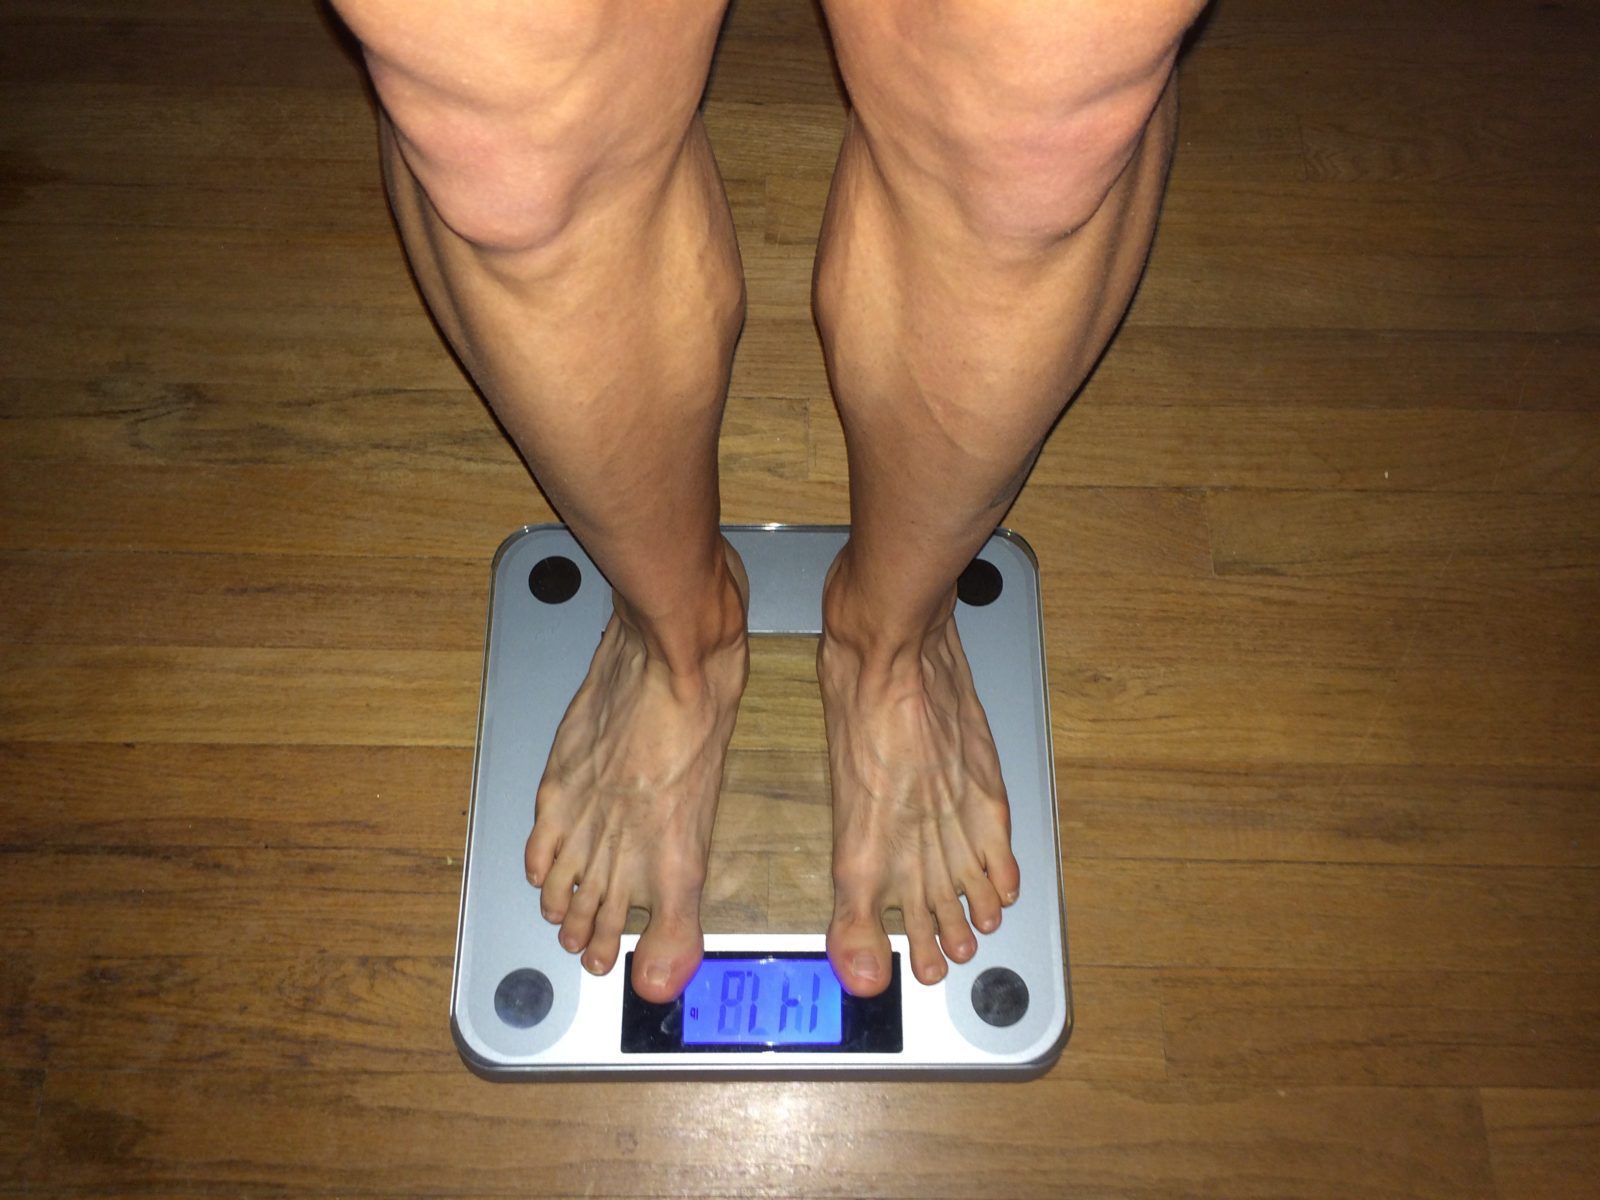 Acupuncture for Weight Loss: Research Update